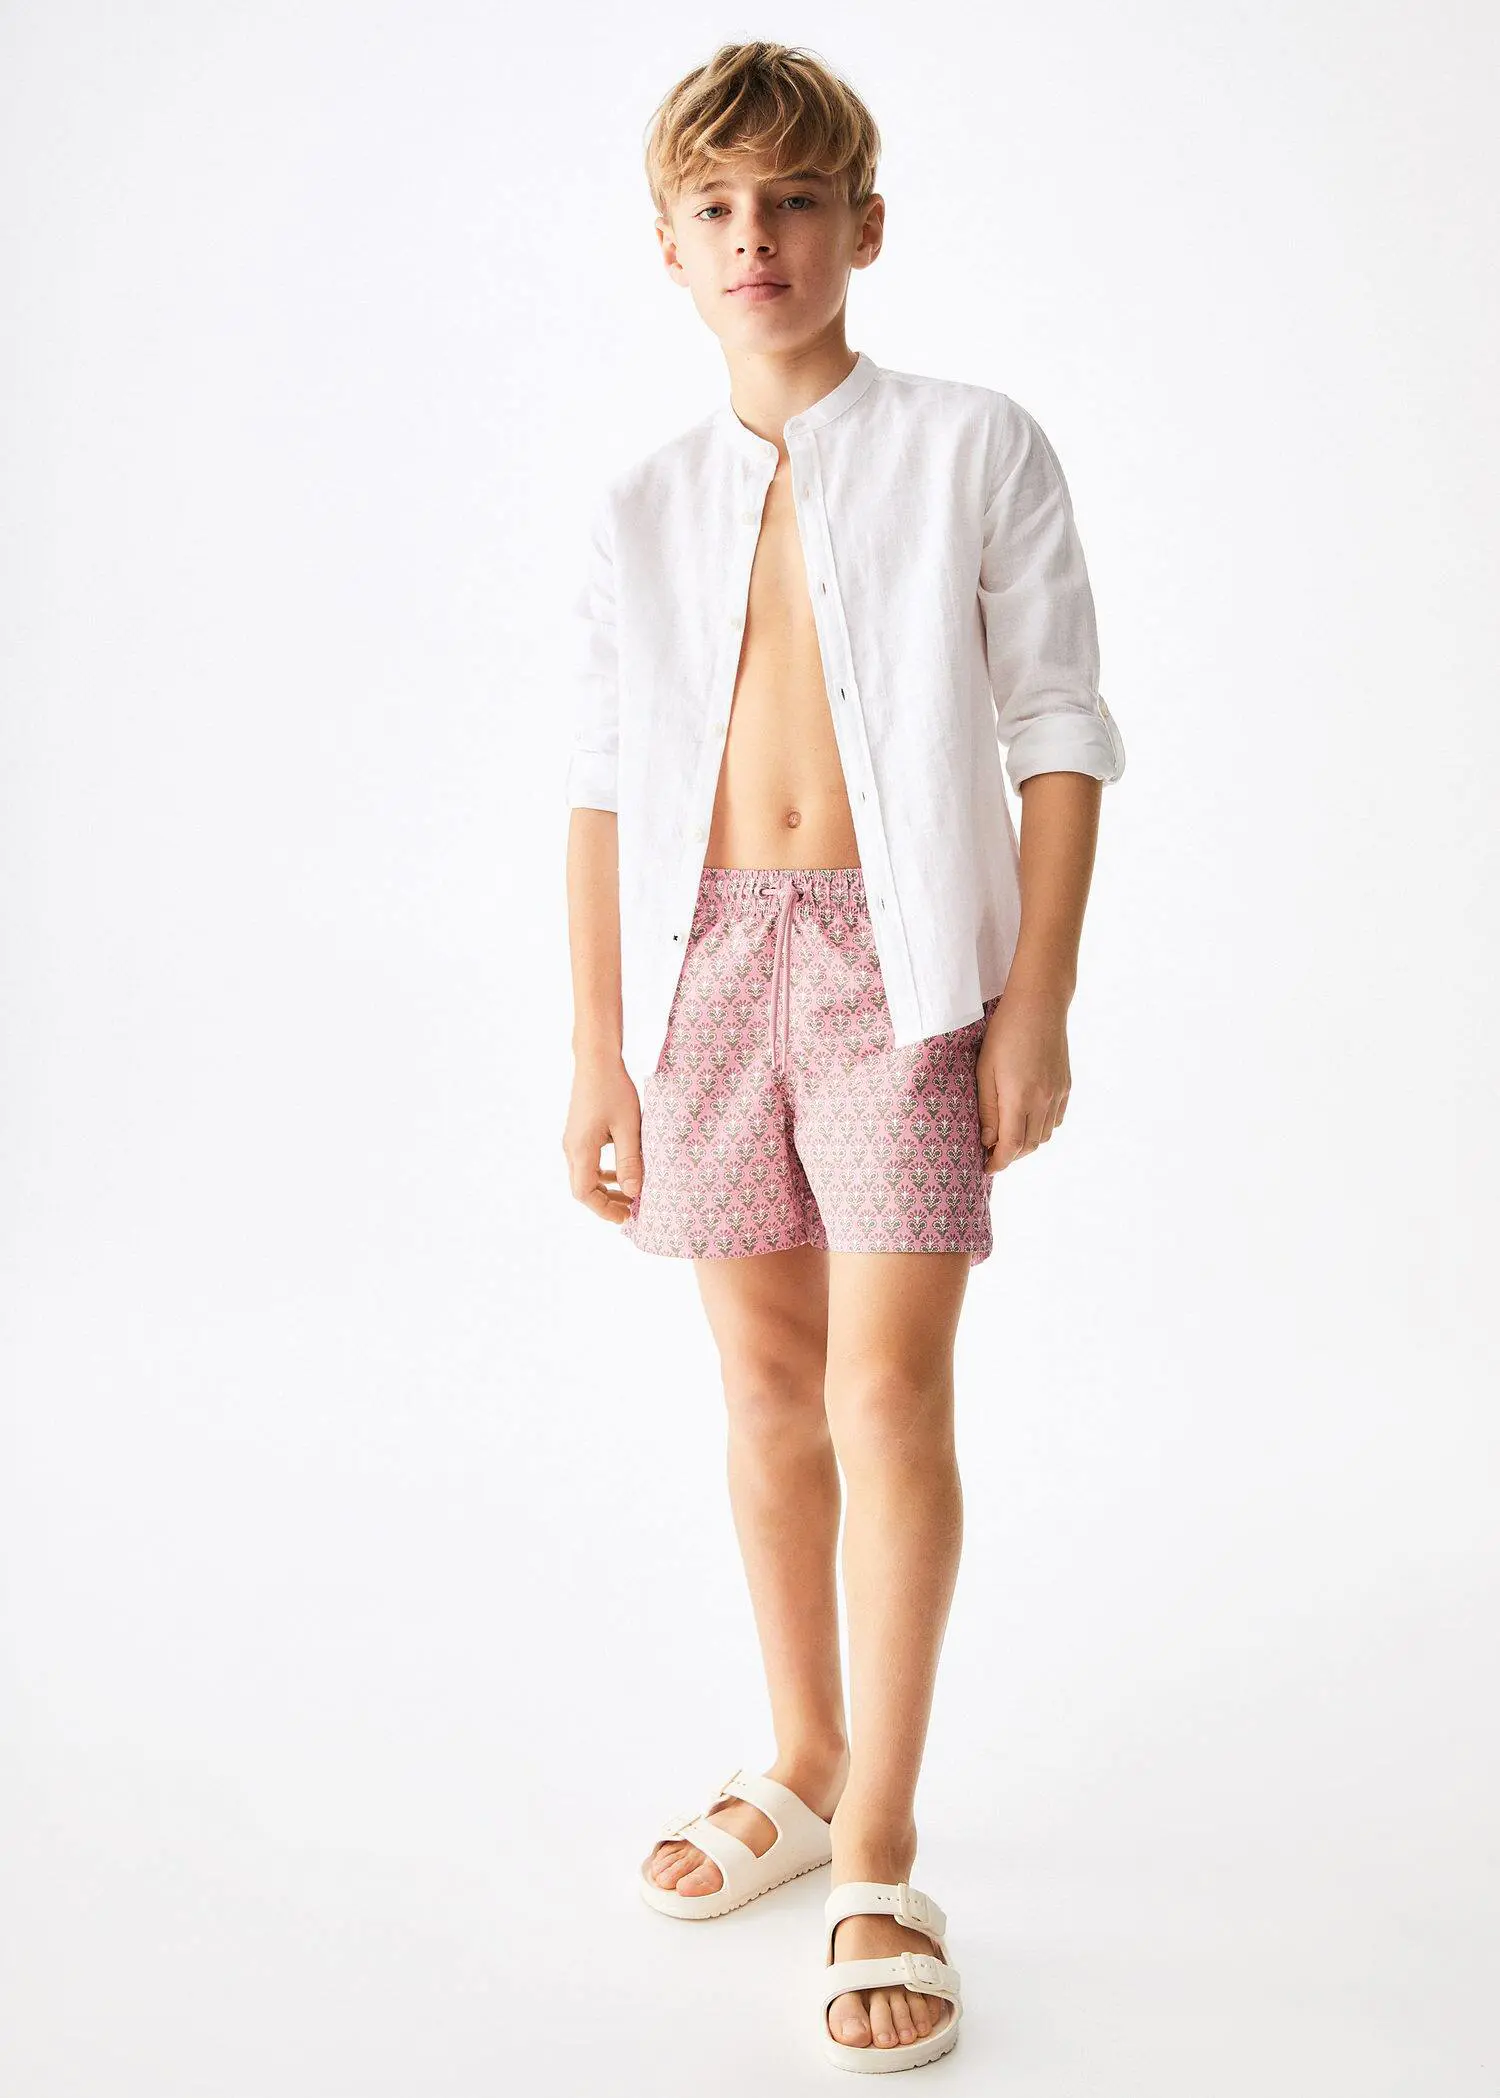 Mango KIDS/ Floral print swimsuit. a young man wearing a white shirt and pink shorts. 